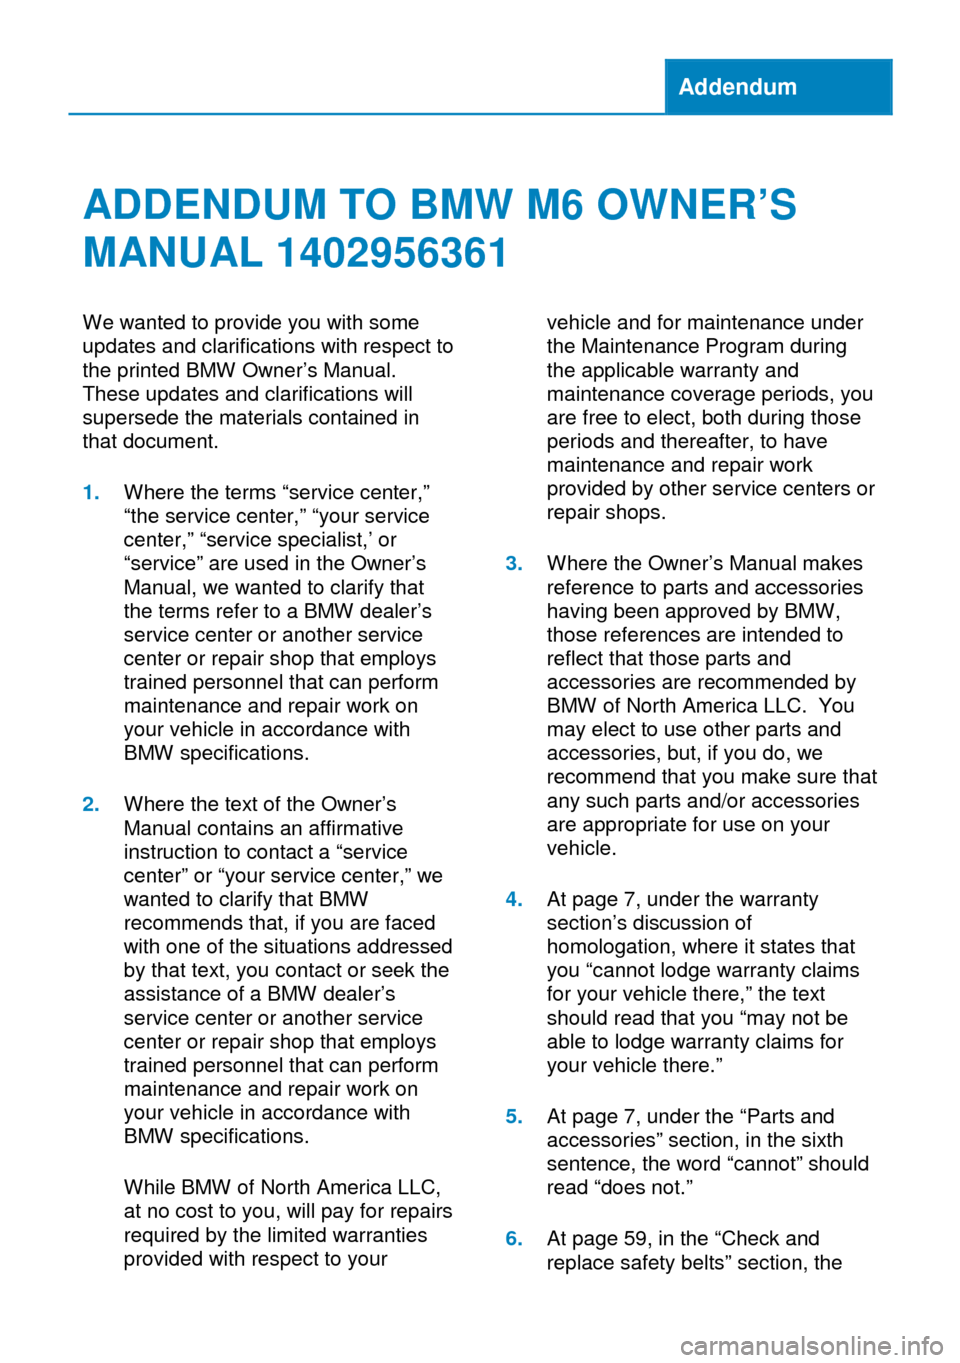 BMW M6 CONVERTIBLE 2014 F12M Owners Manual Addendum
ADDENDUM TO BMW M6 OWNER’S
MANUAL 1402956361
We wanted to provide you with some
updates and clarifications with respect to
the printed BMW Owner’s Manual.
These updates and clarifications